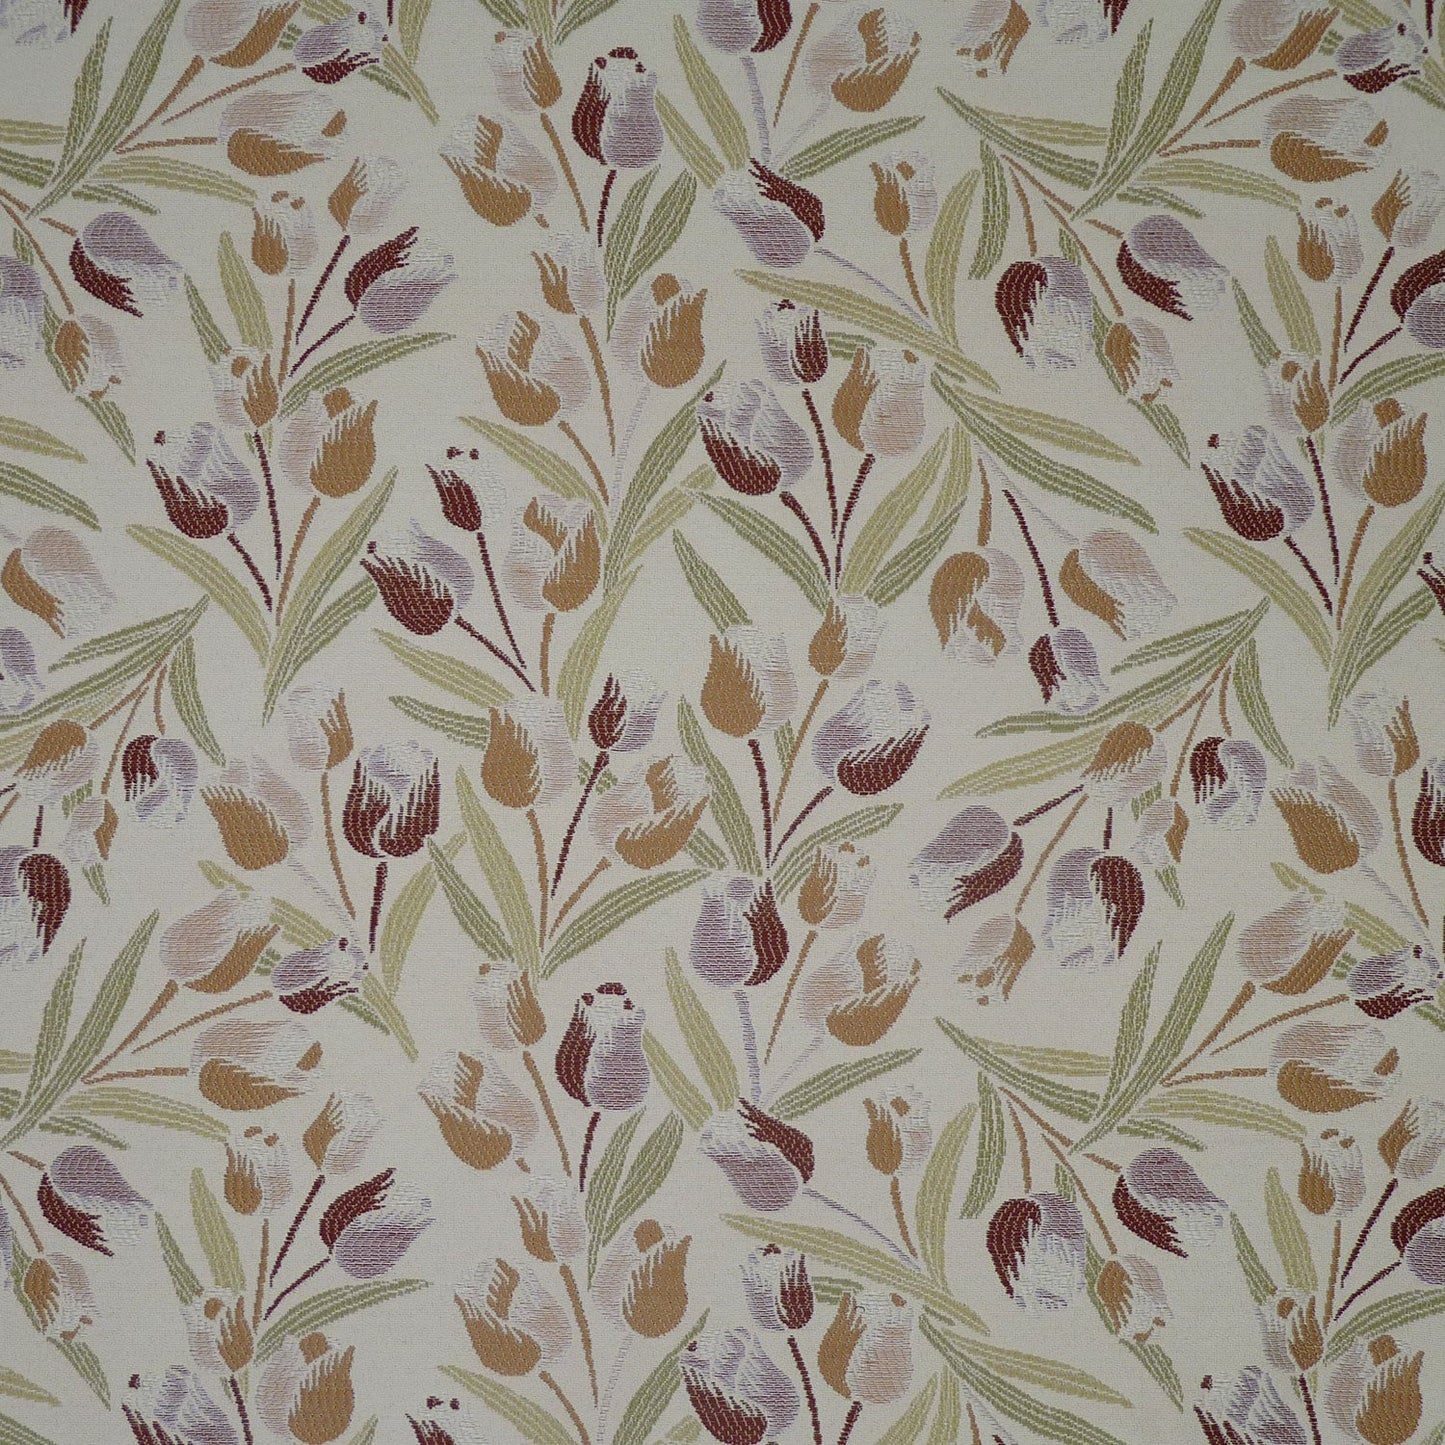 Brisbane Terracotta Floral Made to Measure Curtains